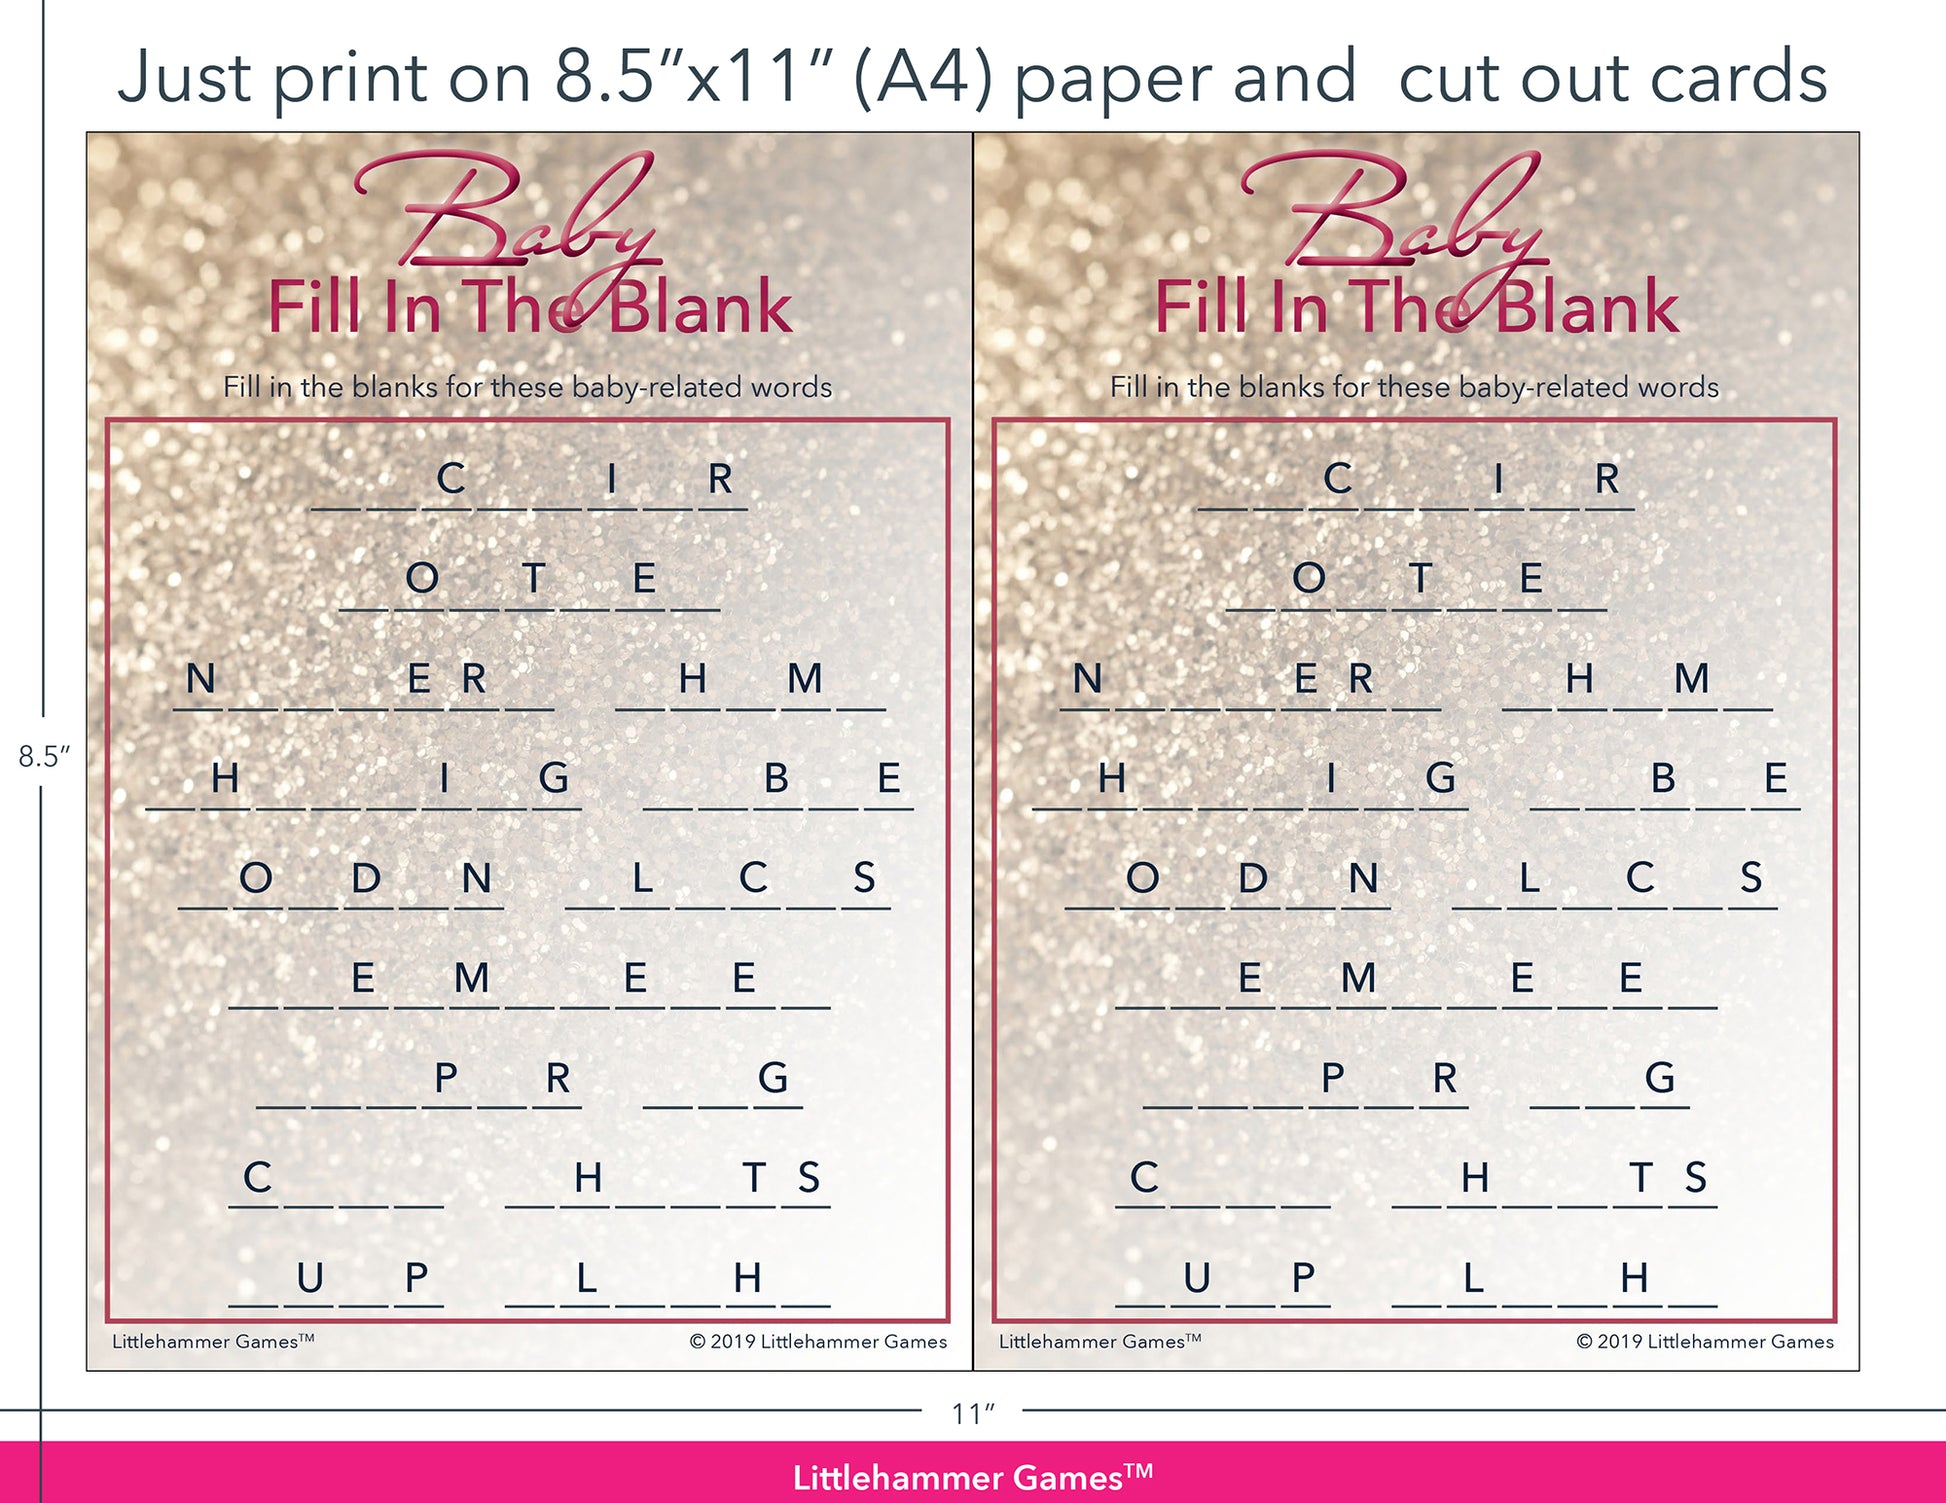 Baby Fill in the Blank glittery rose gold game cards with printing instructions